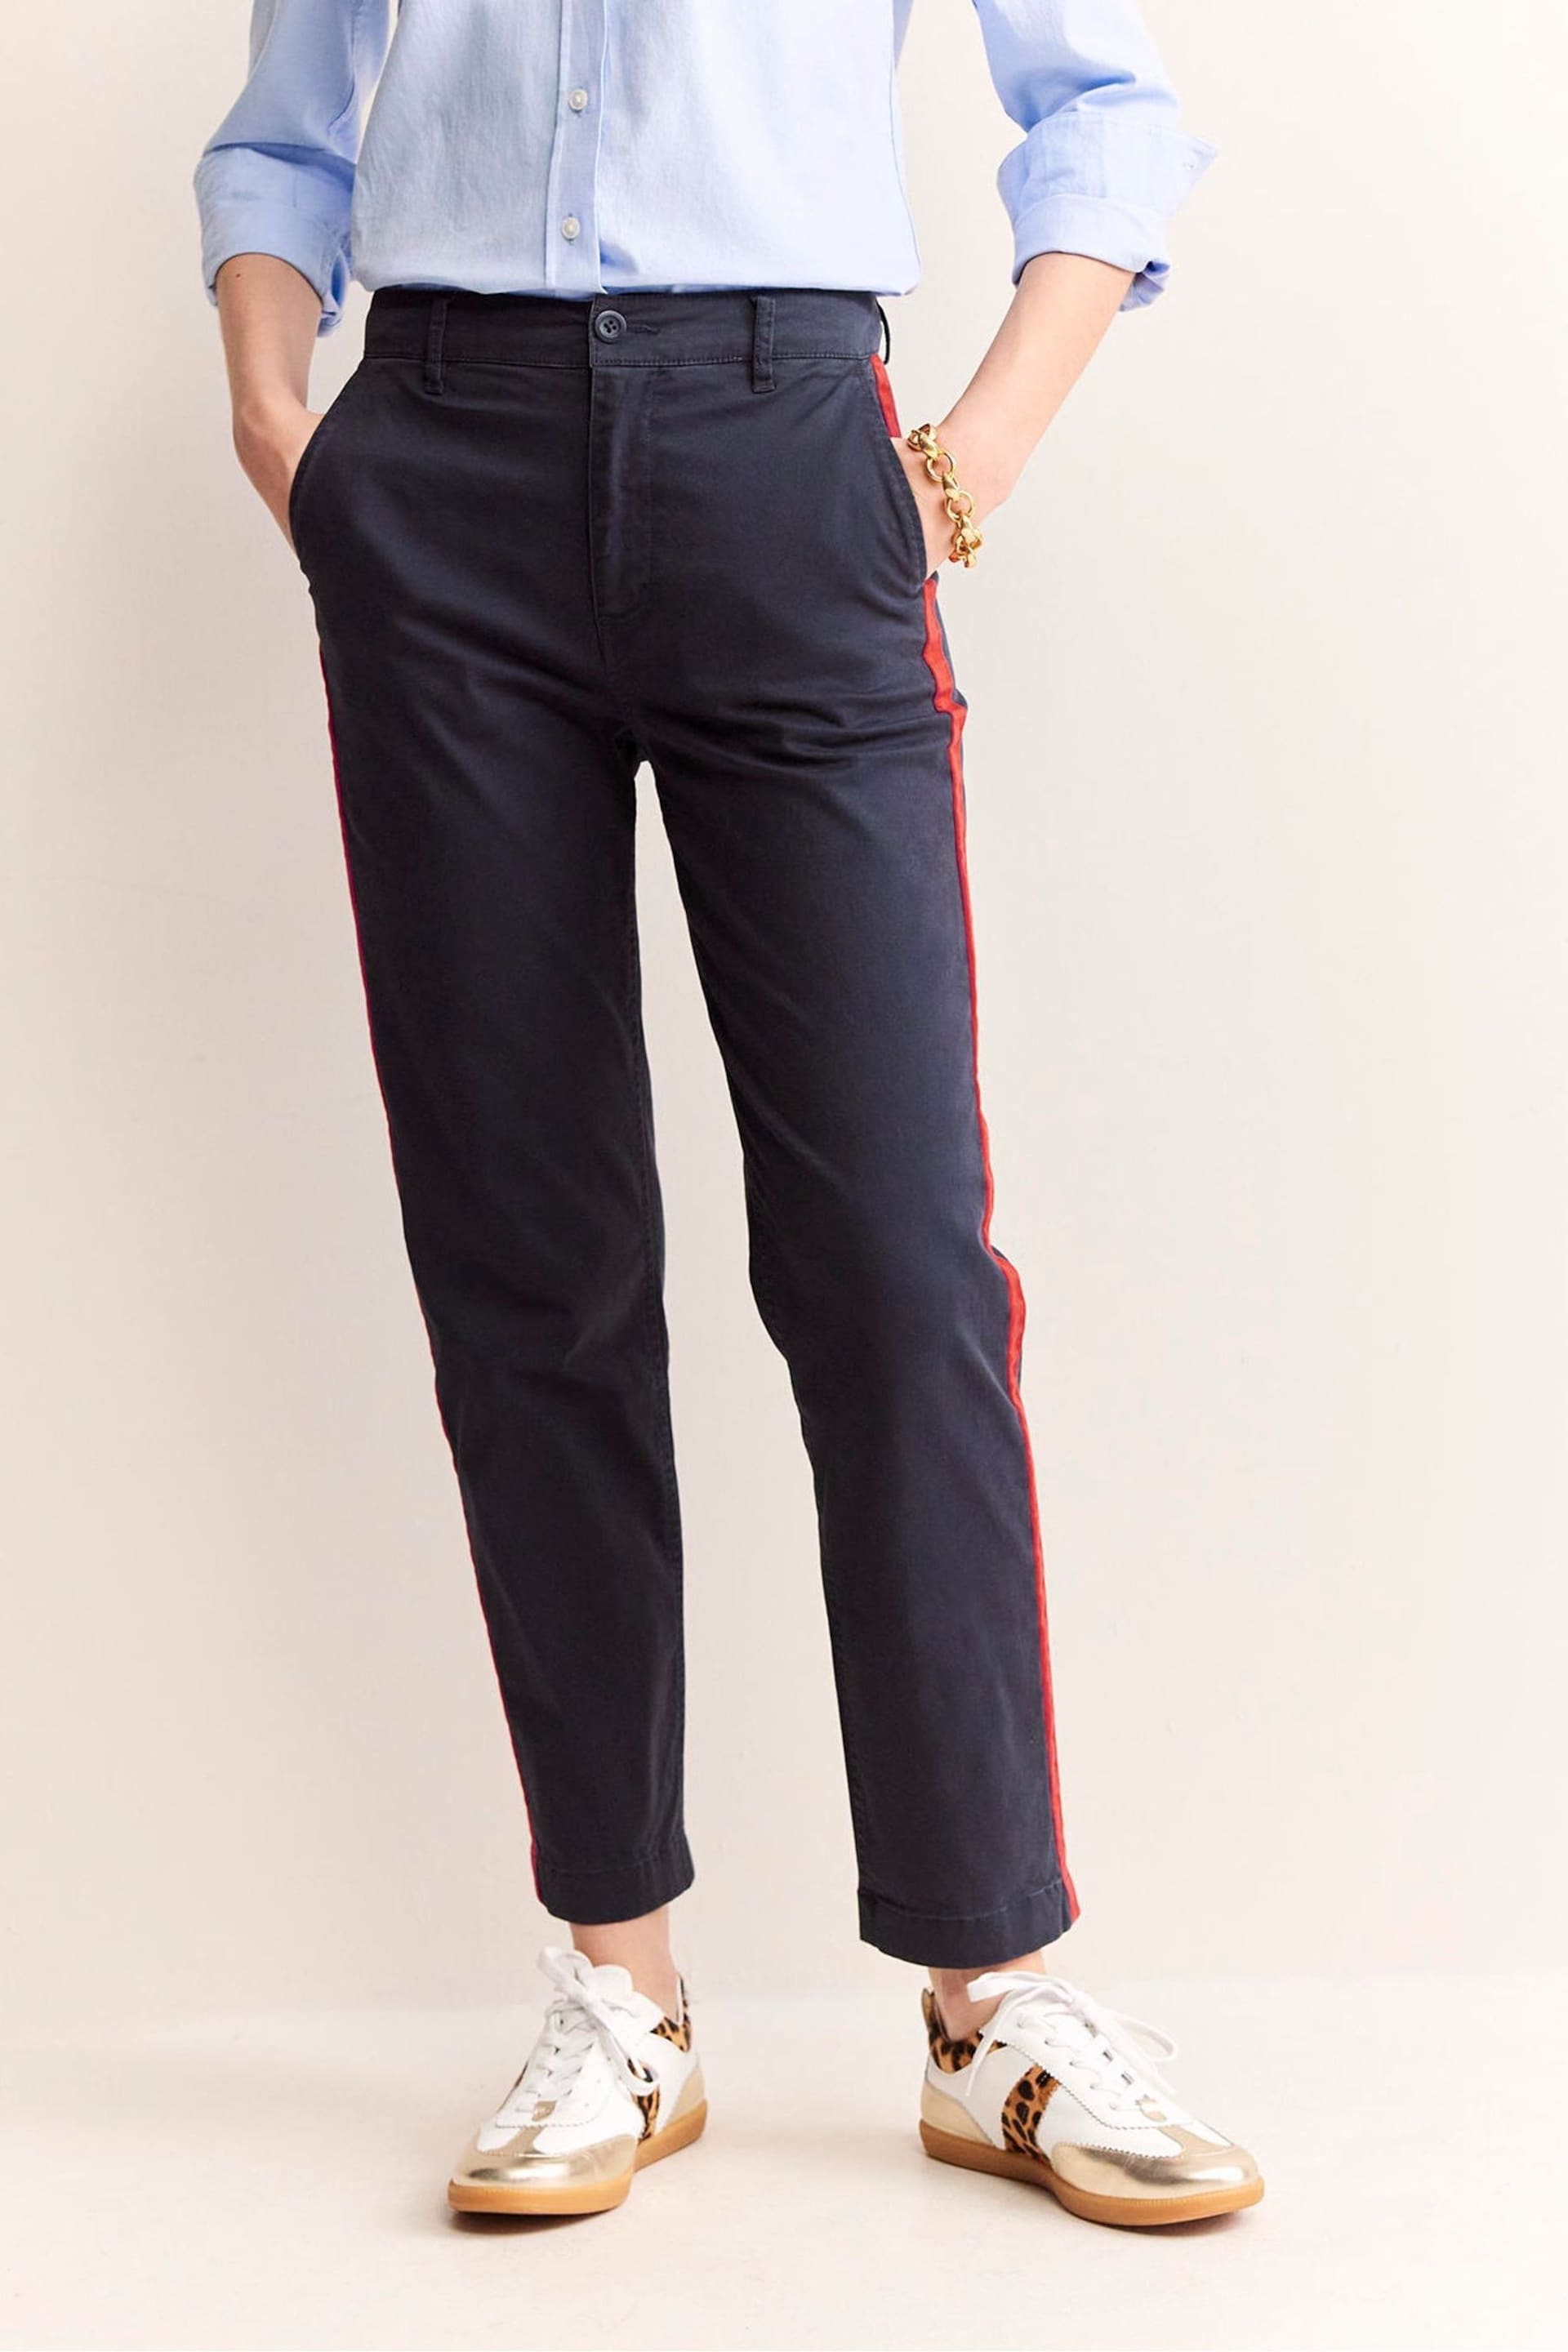 Boden Blue Petite Barnsbury Chinos Trousers - Image 3 of 5